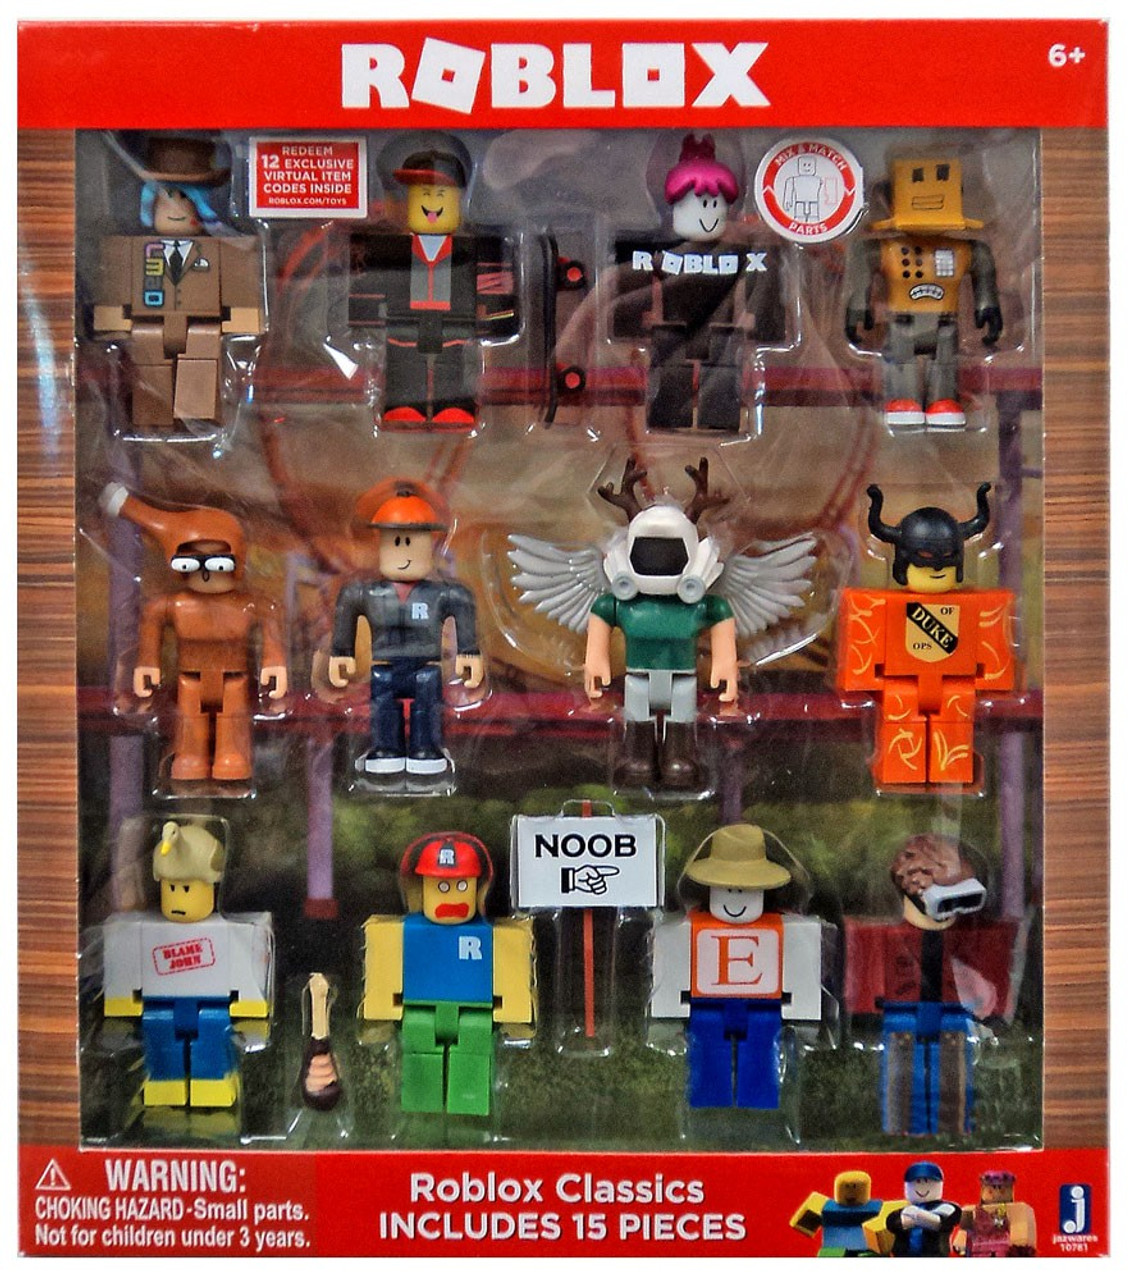 Roblox Series 1 Roblox Classics Exclusive 3 Action Figure 12 Pack Includes 12 Online Item Codes Jazwares Toywiz - details about roblox toys action figures roblox high school 2 figures with virtual game code